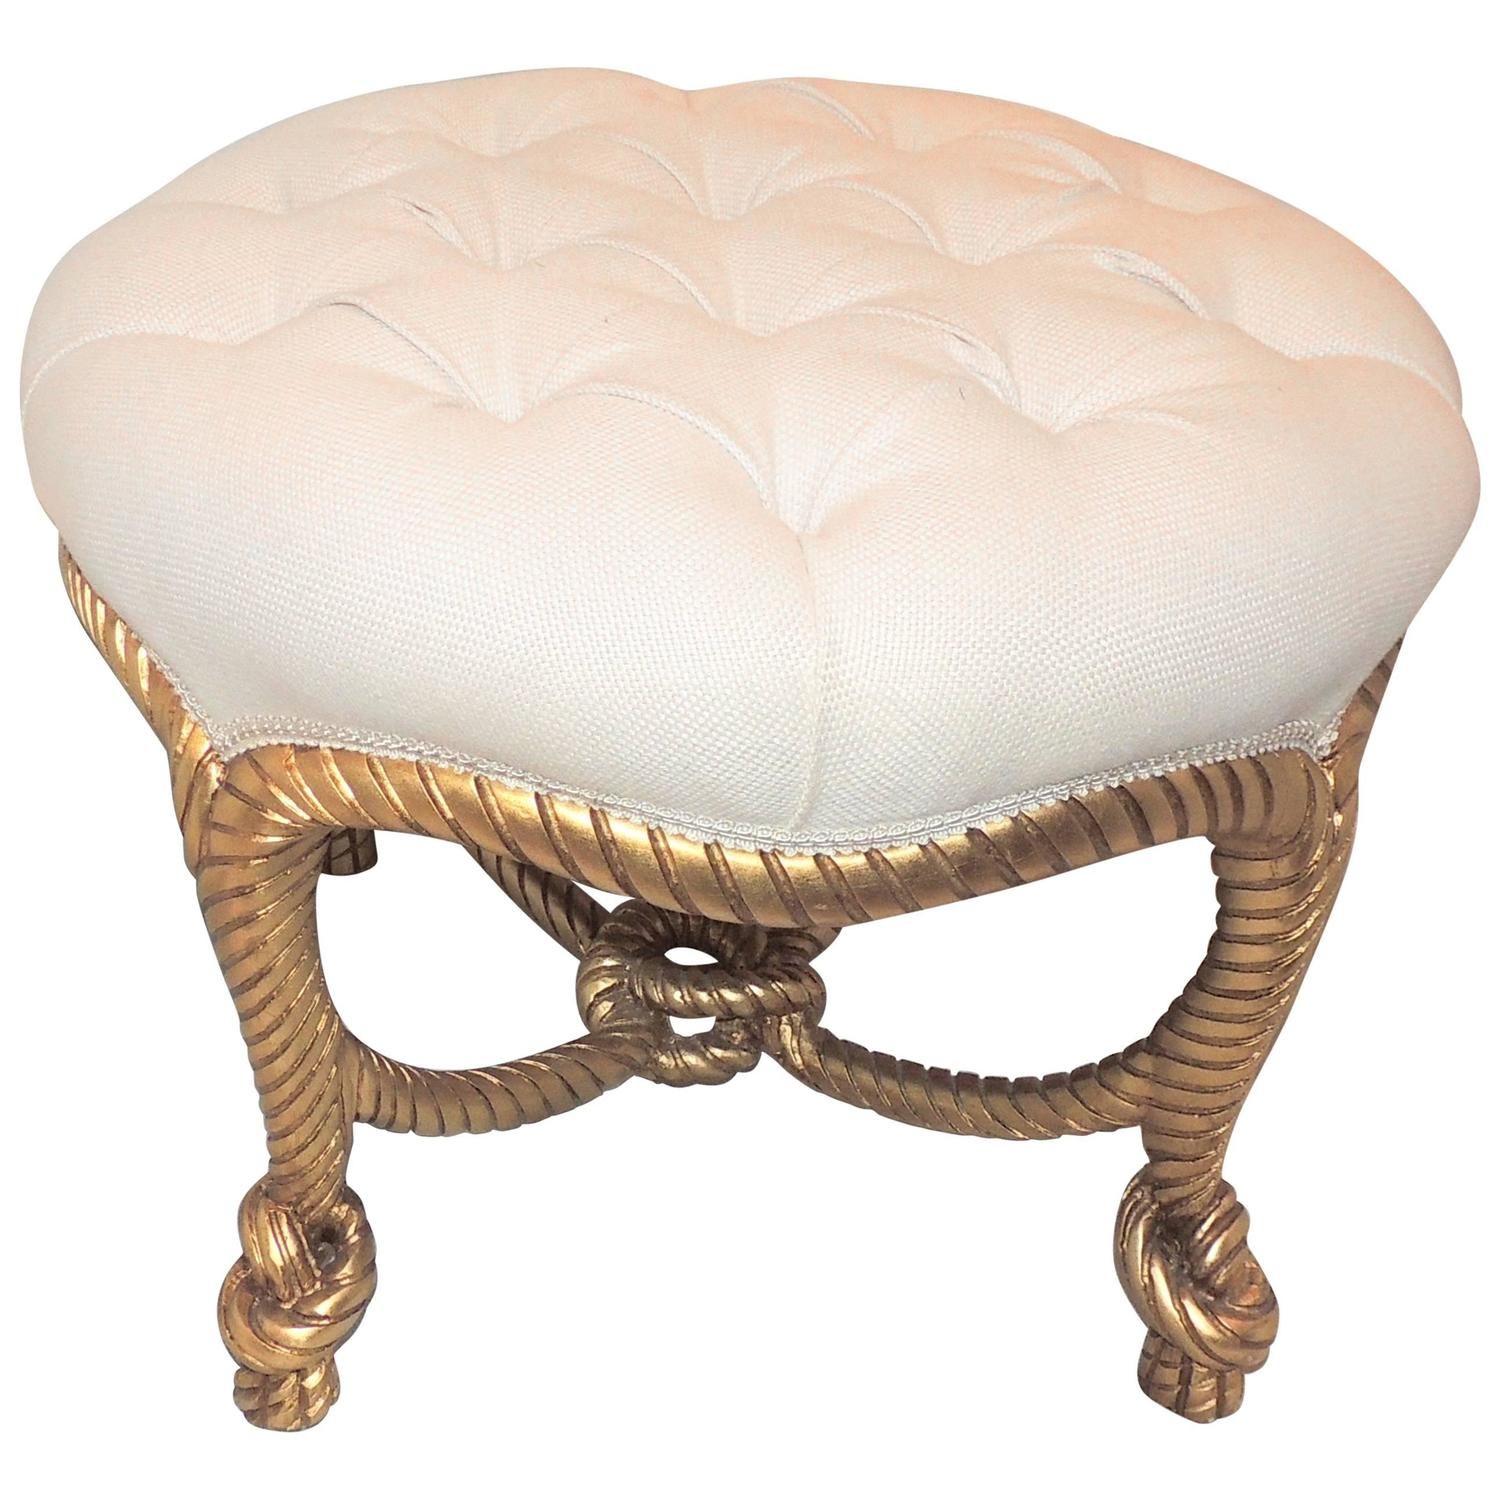 Wonderful French Gilt Wood Rope Tassel Bow Tufted Ottoman Round Bench Pertaining To Round Cream Tasseled Ottomans (View 9 of 20)